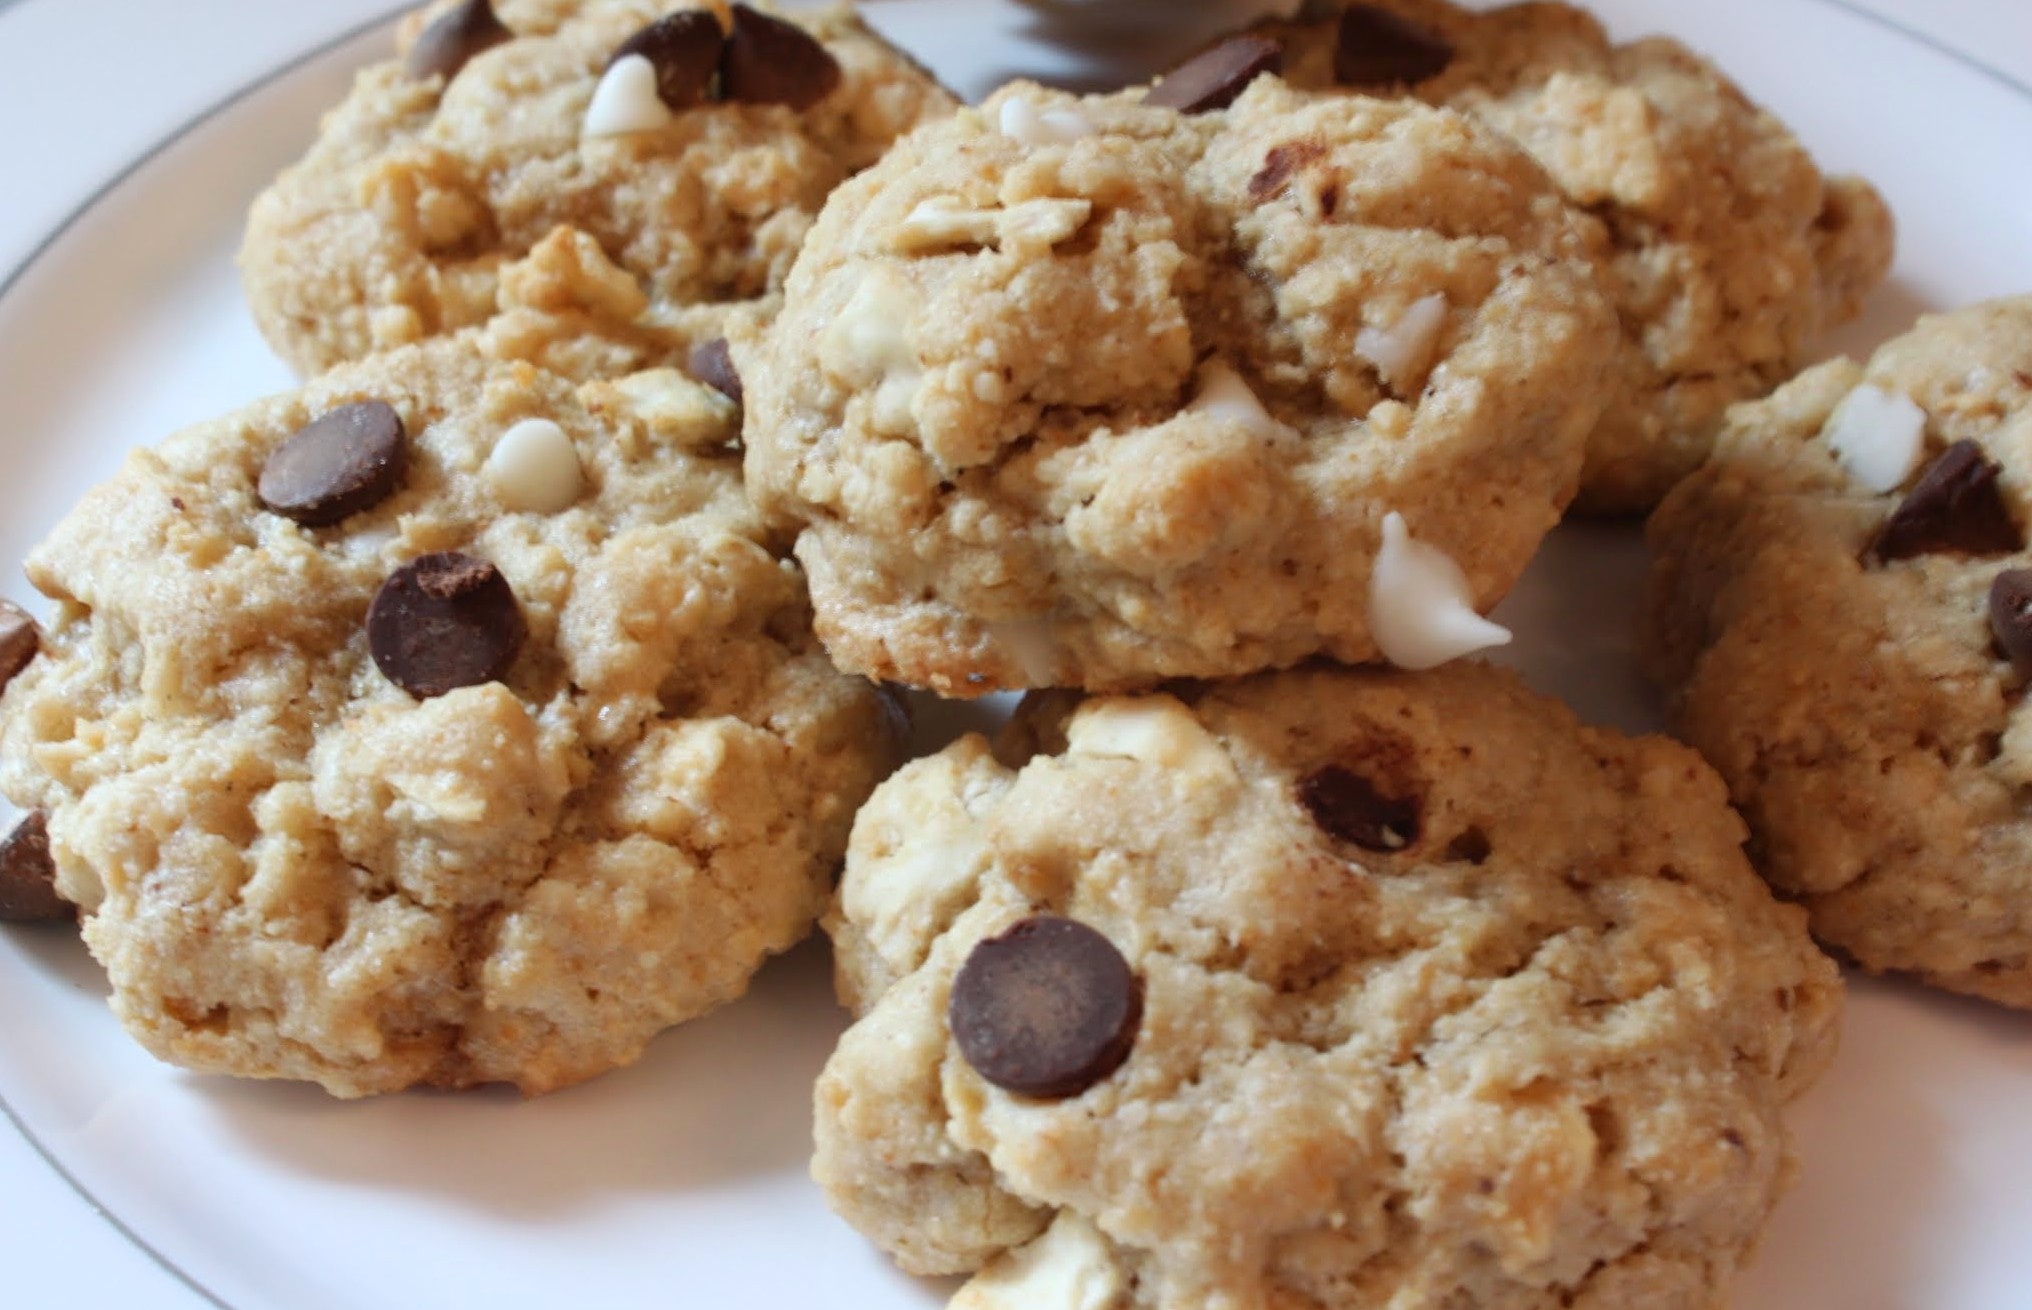 Chocolate Chip Cookies (Passover)